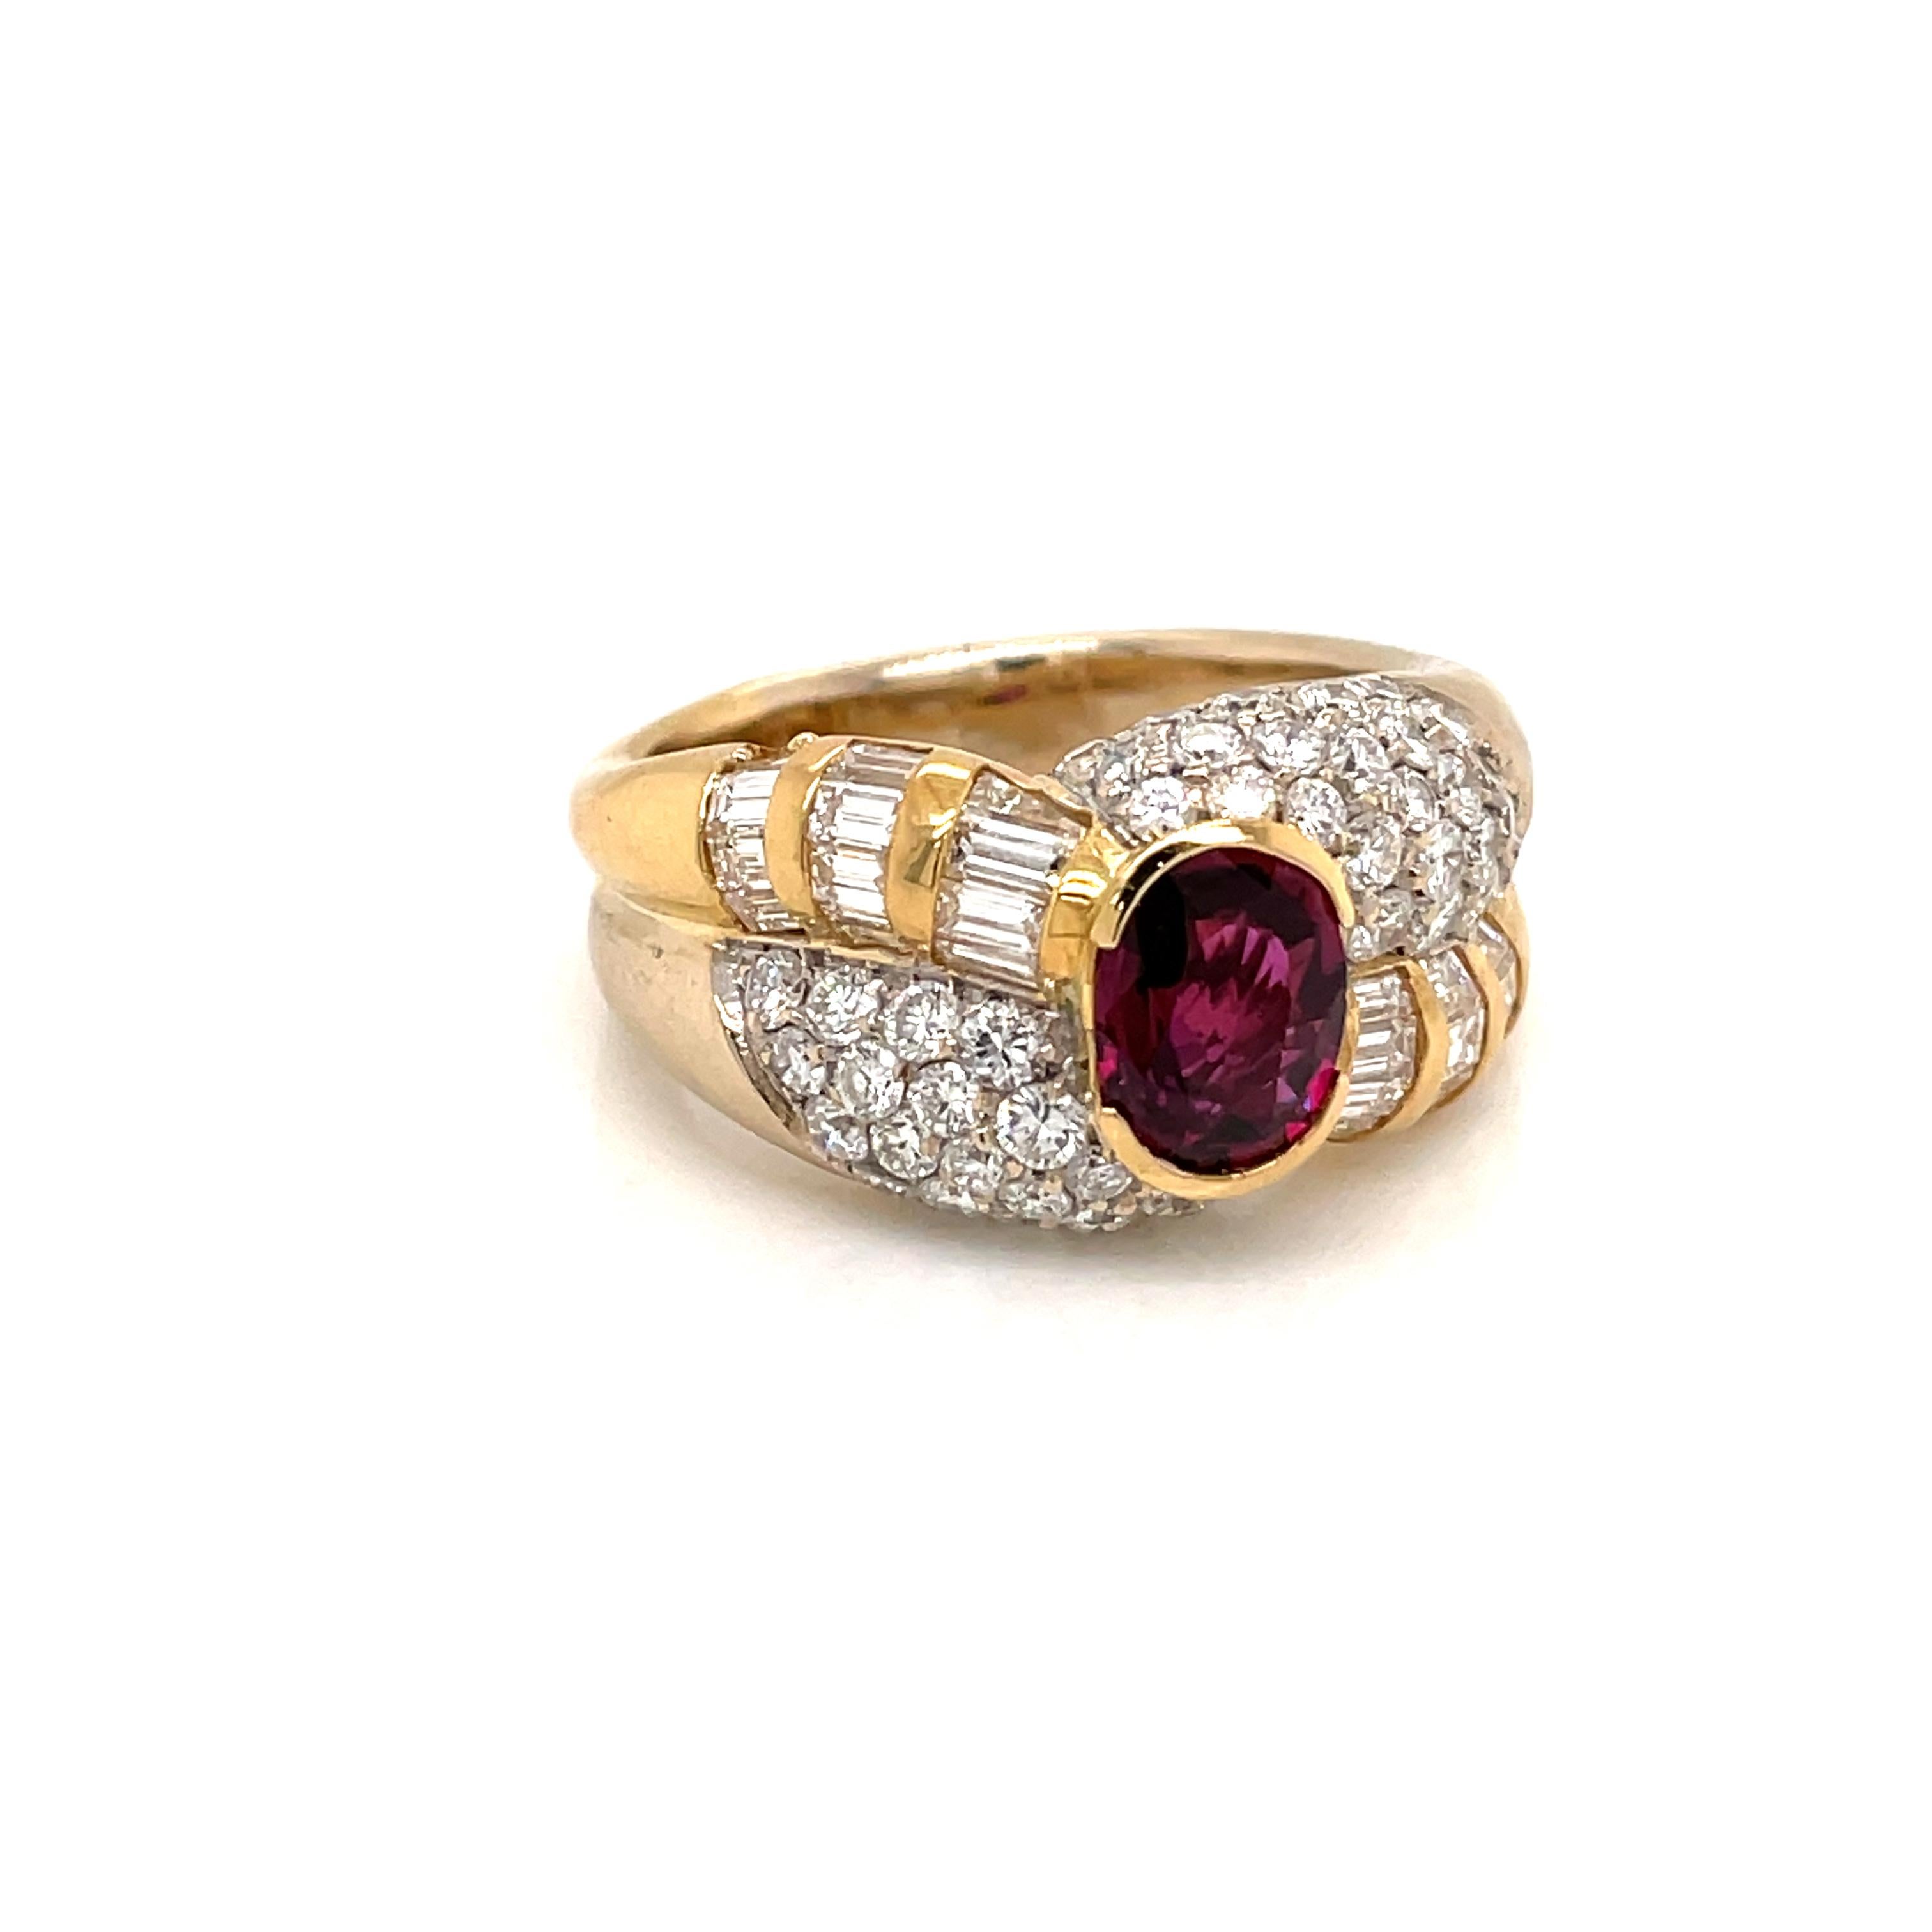 Beautiful and important 18K Yellow and White Gold Cocktail Ring centered with a Sparkling Oval cut Natural Unheated Ruby weighing 2 carat. It is set with fine Round brilliant and Baguette cut diamonds,  weighing total 4 carats, graded G color with